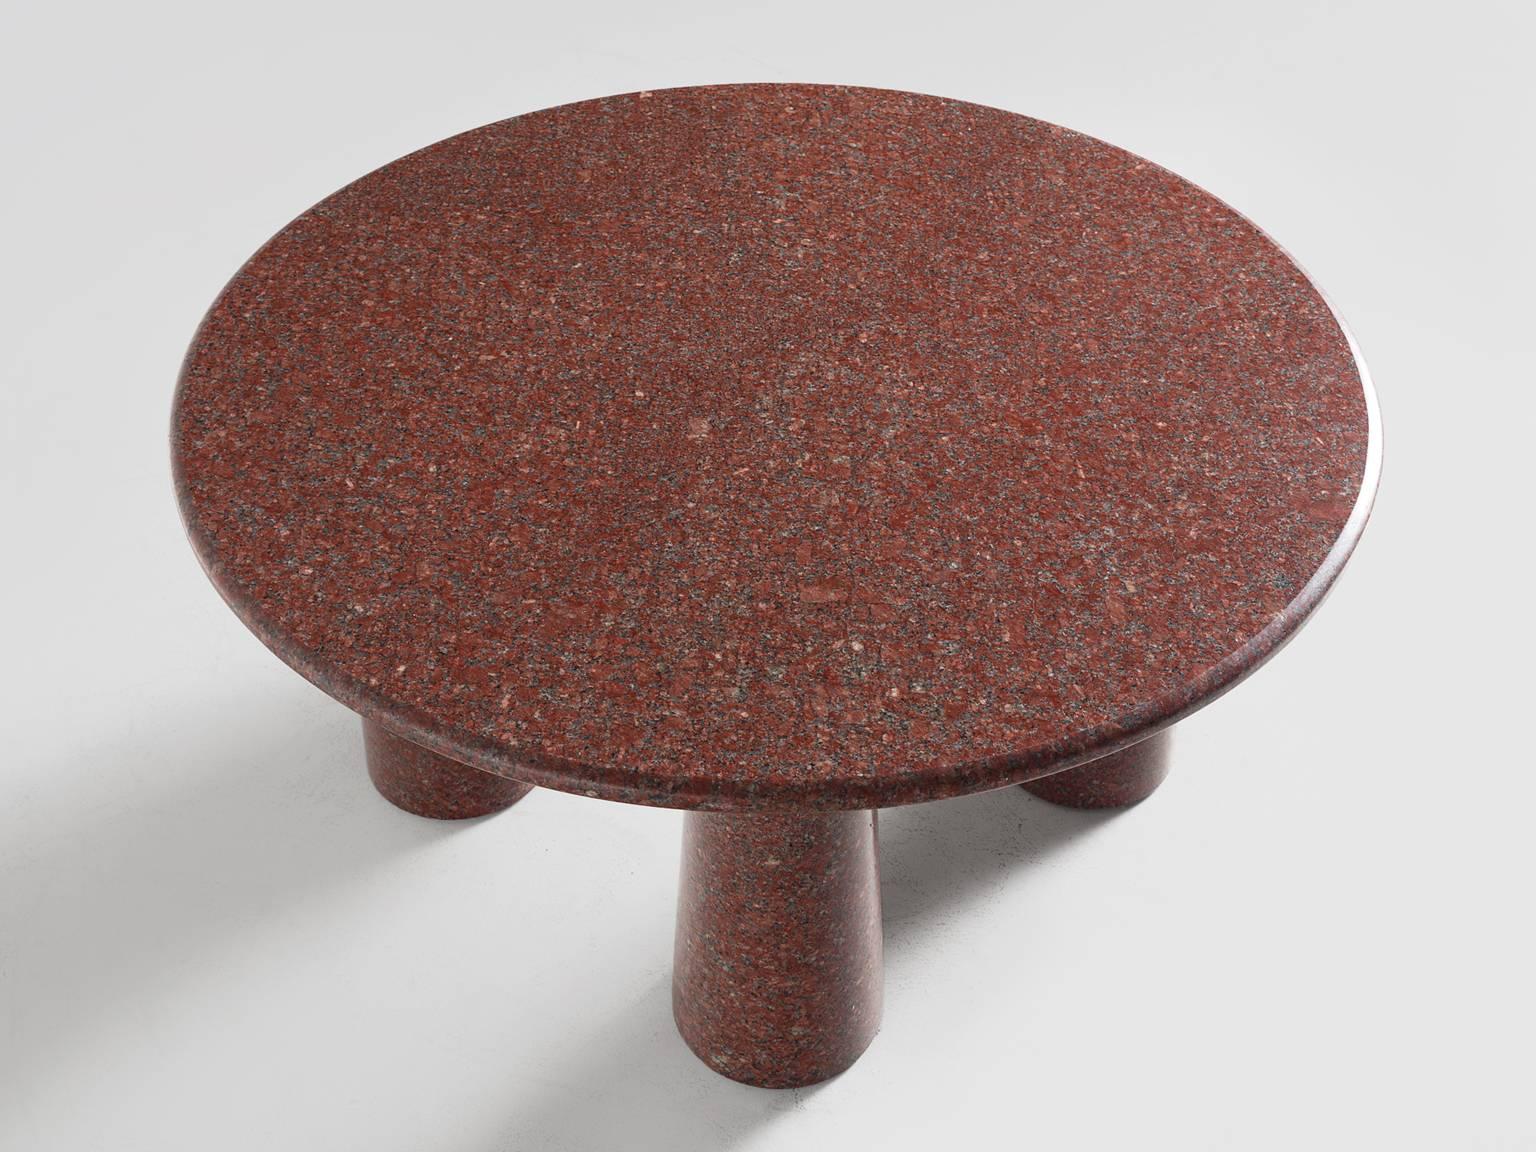 European Architectural Stone Coffee Table in Balmoral Red